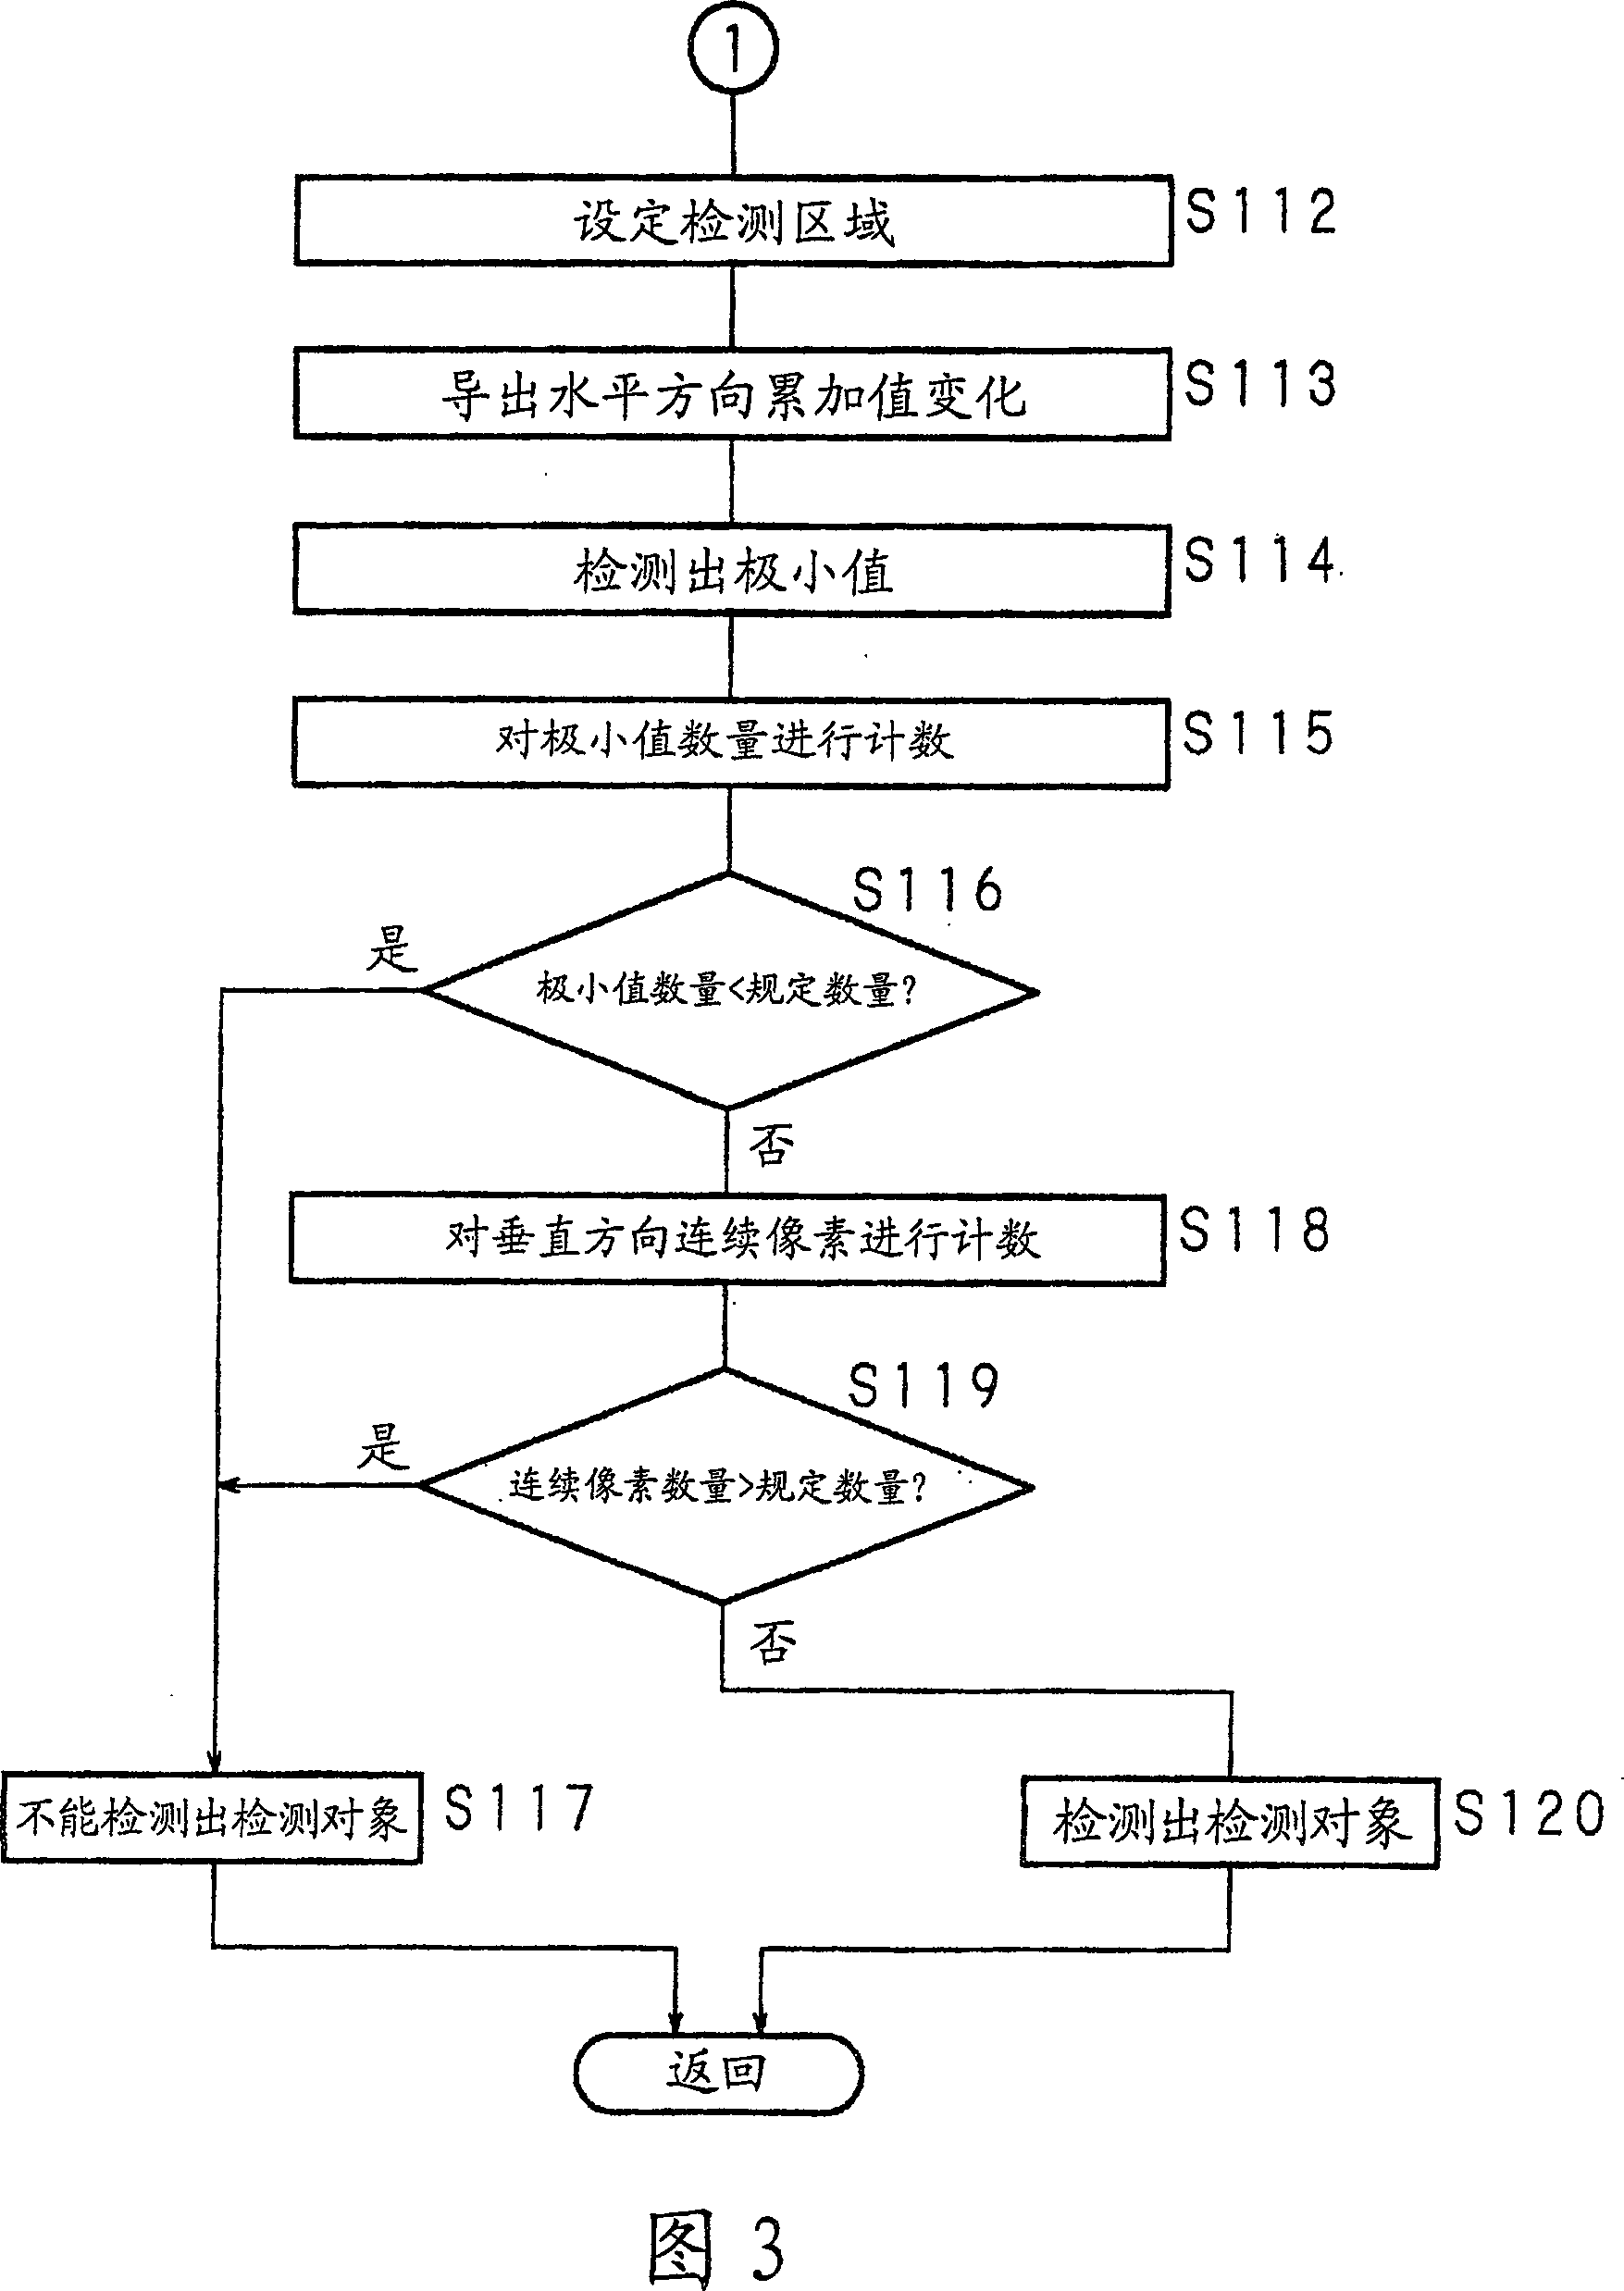 Image processing process, image processing apparatus, image processing system and computer program